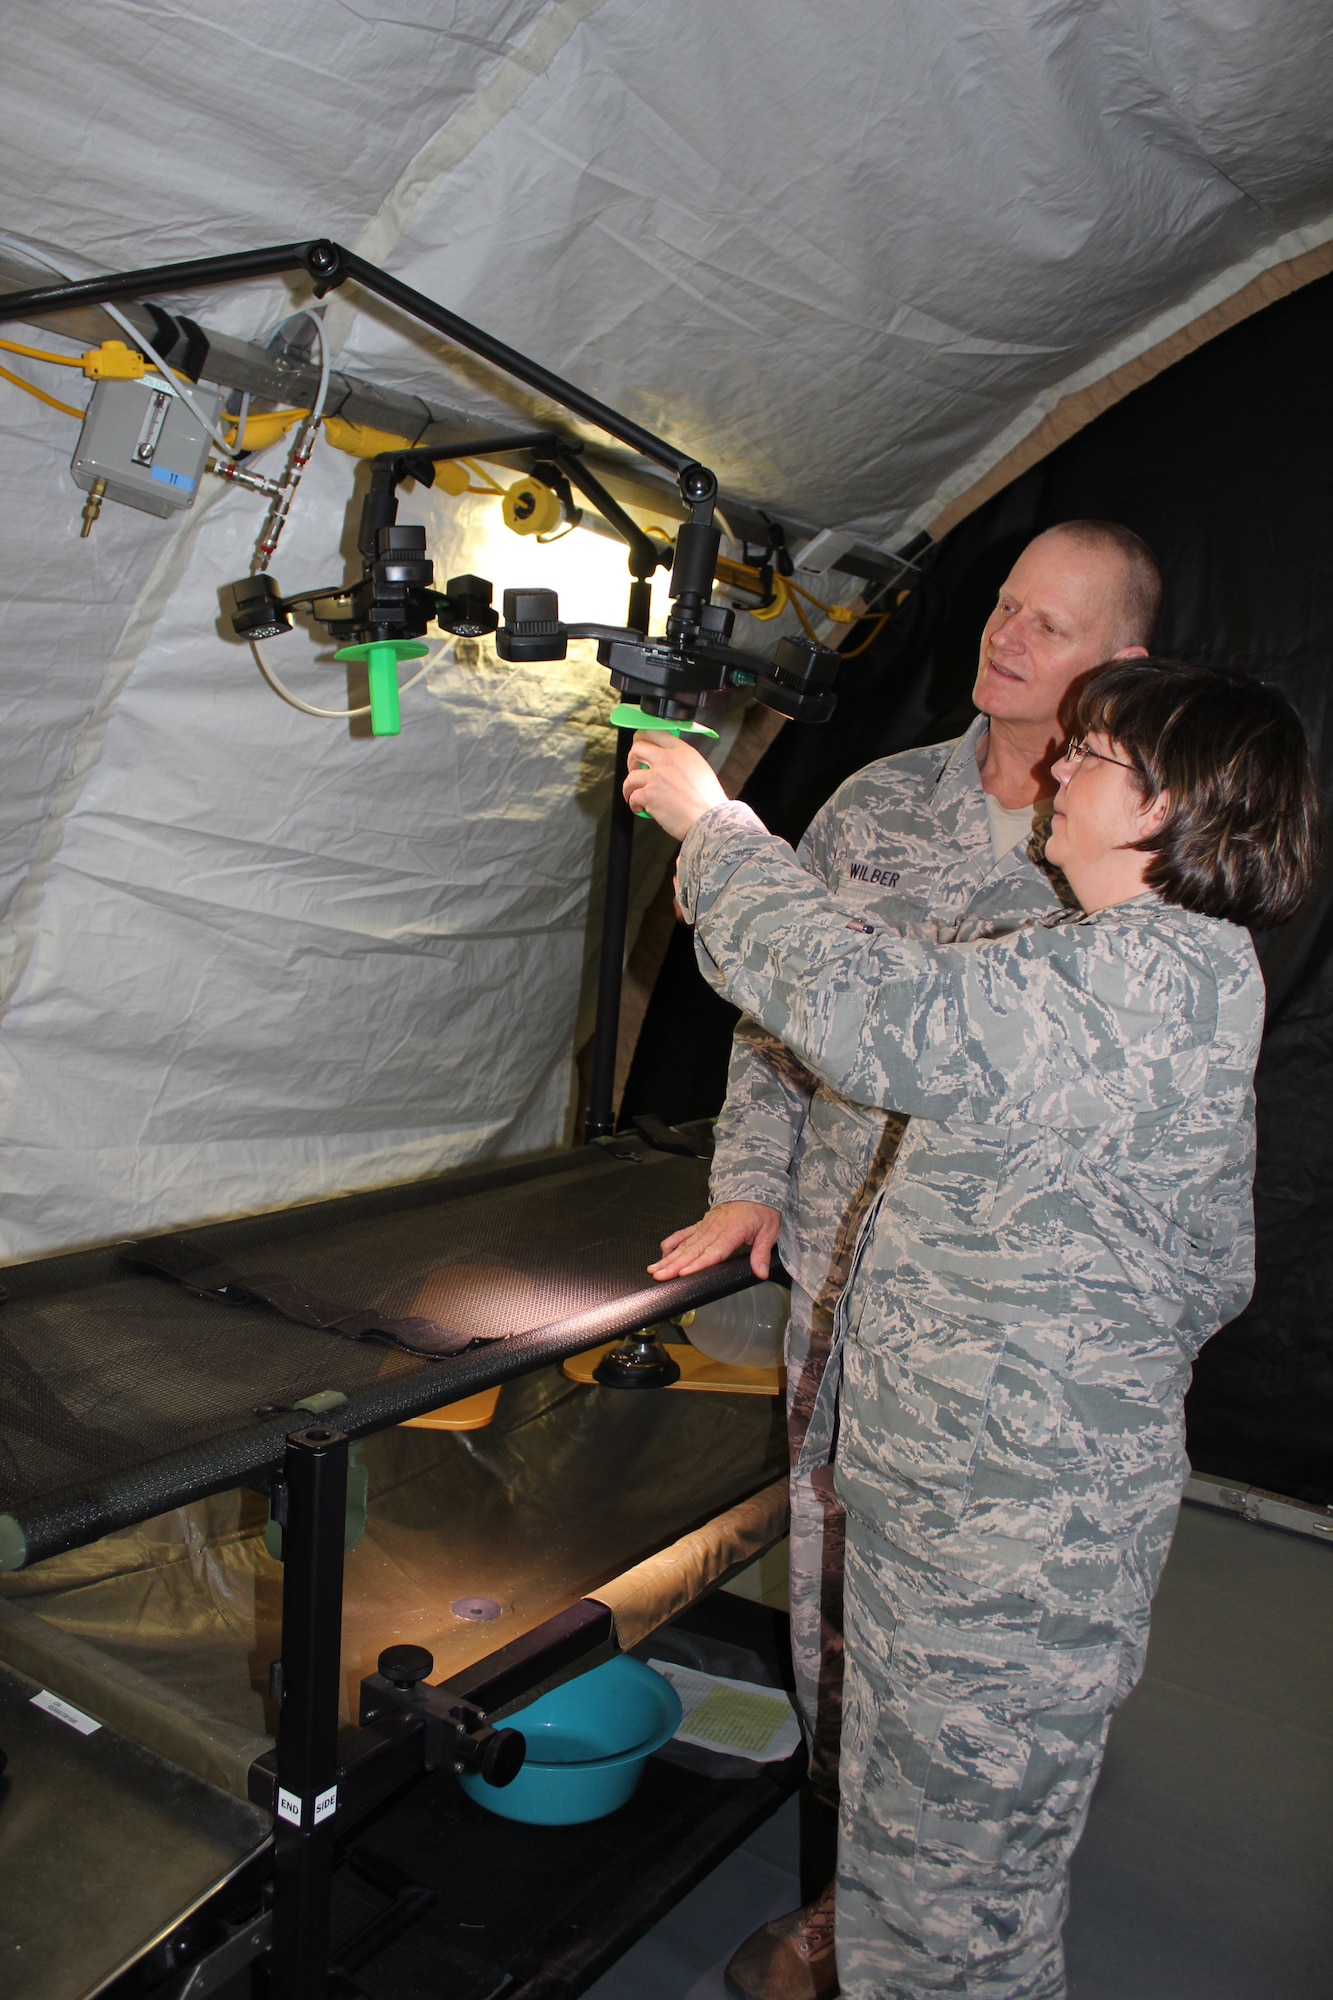 Lt. Col. Brandi Ritter and Lt. Col. Lewis Wilber, the Chief and Deputy Chief, Air Force Medical Evaluation Support Activity, examine the lights above a surgical table at the AMESA test facility at Ft. Detrick, Md. on Feb. 15, 2018. AFMESA investigated whether new, light-emitting diode (LED) lights could replace traditional surgical lights for use in deployed environments, but found that under the LEDs, surgeons could not determine if a patient’s flesh was necrotic. (U.S. Air Force photo by Shireen Bedi)